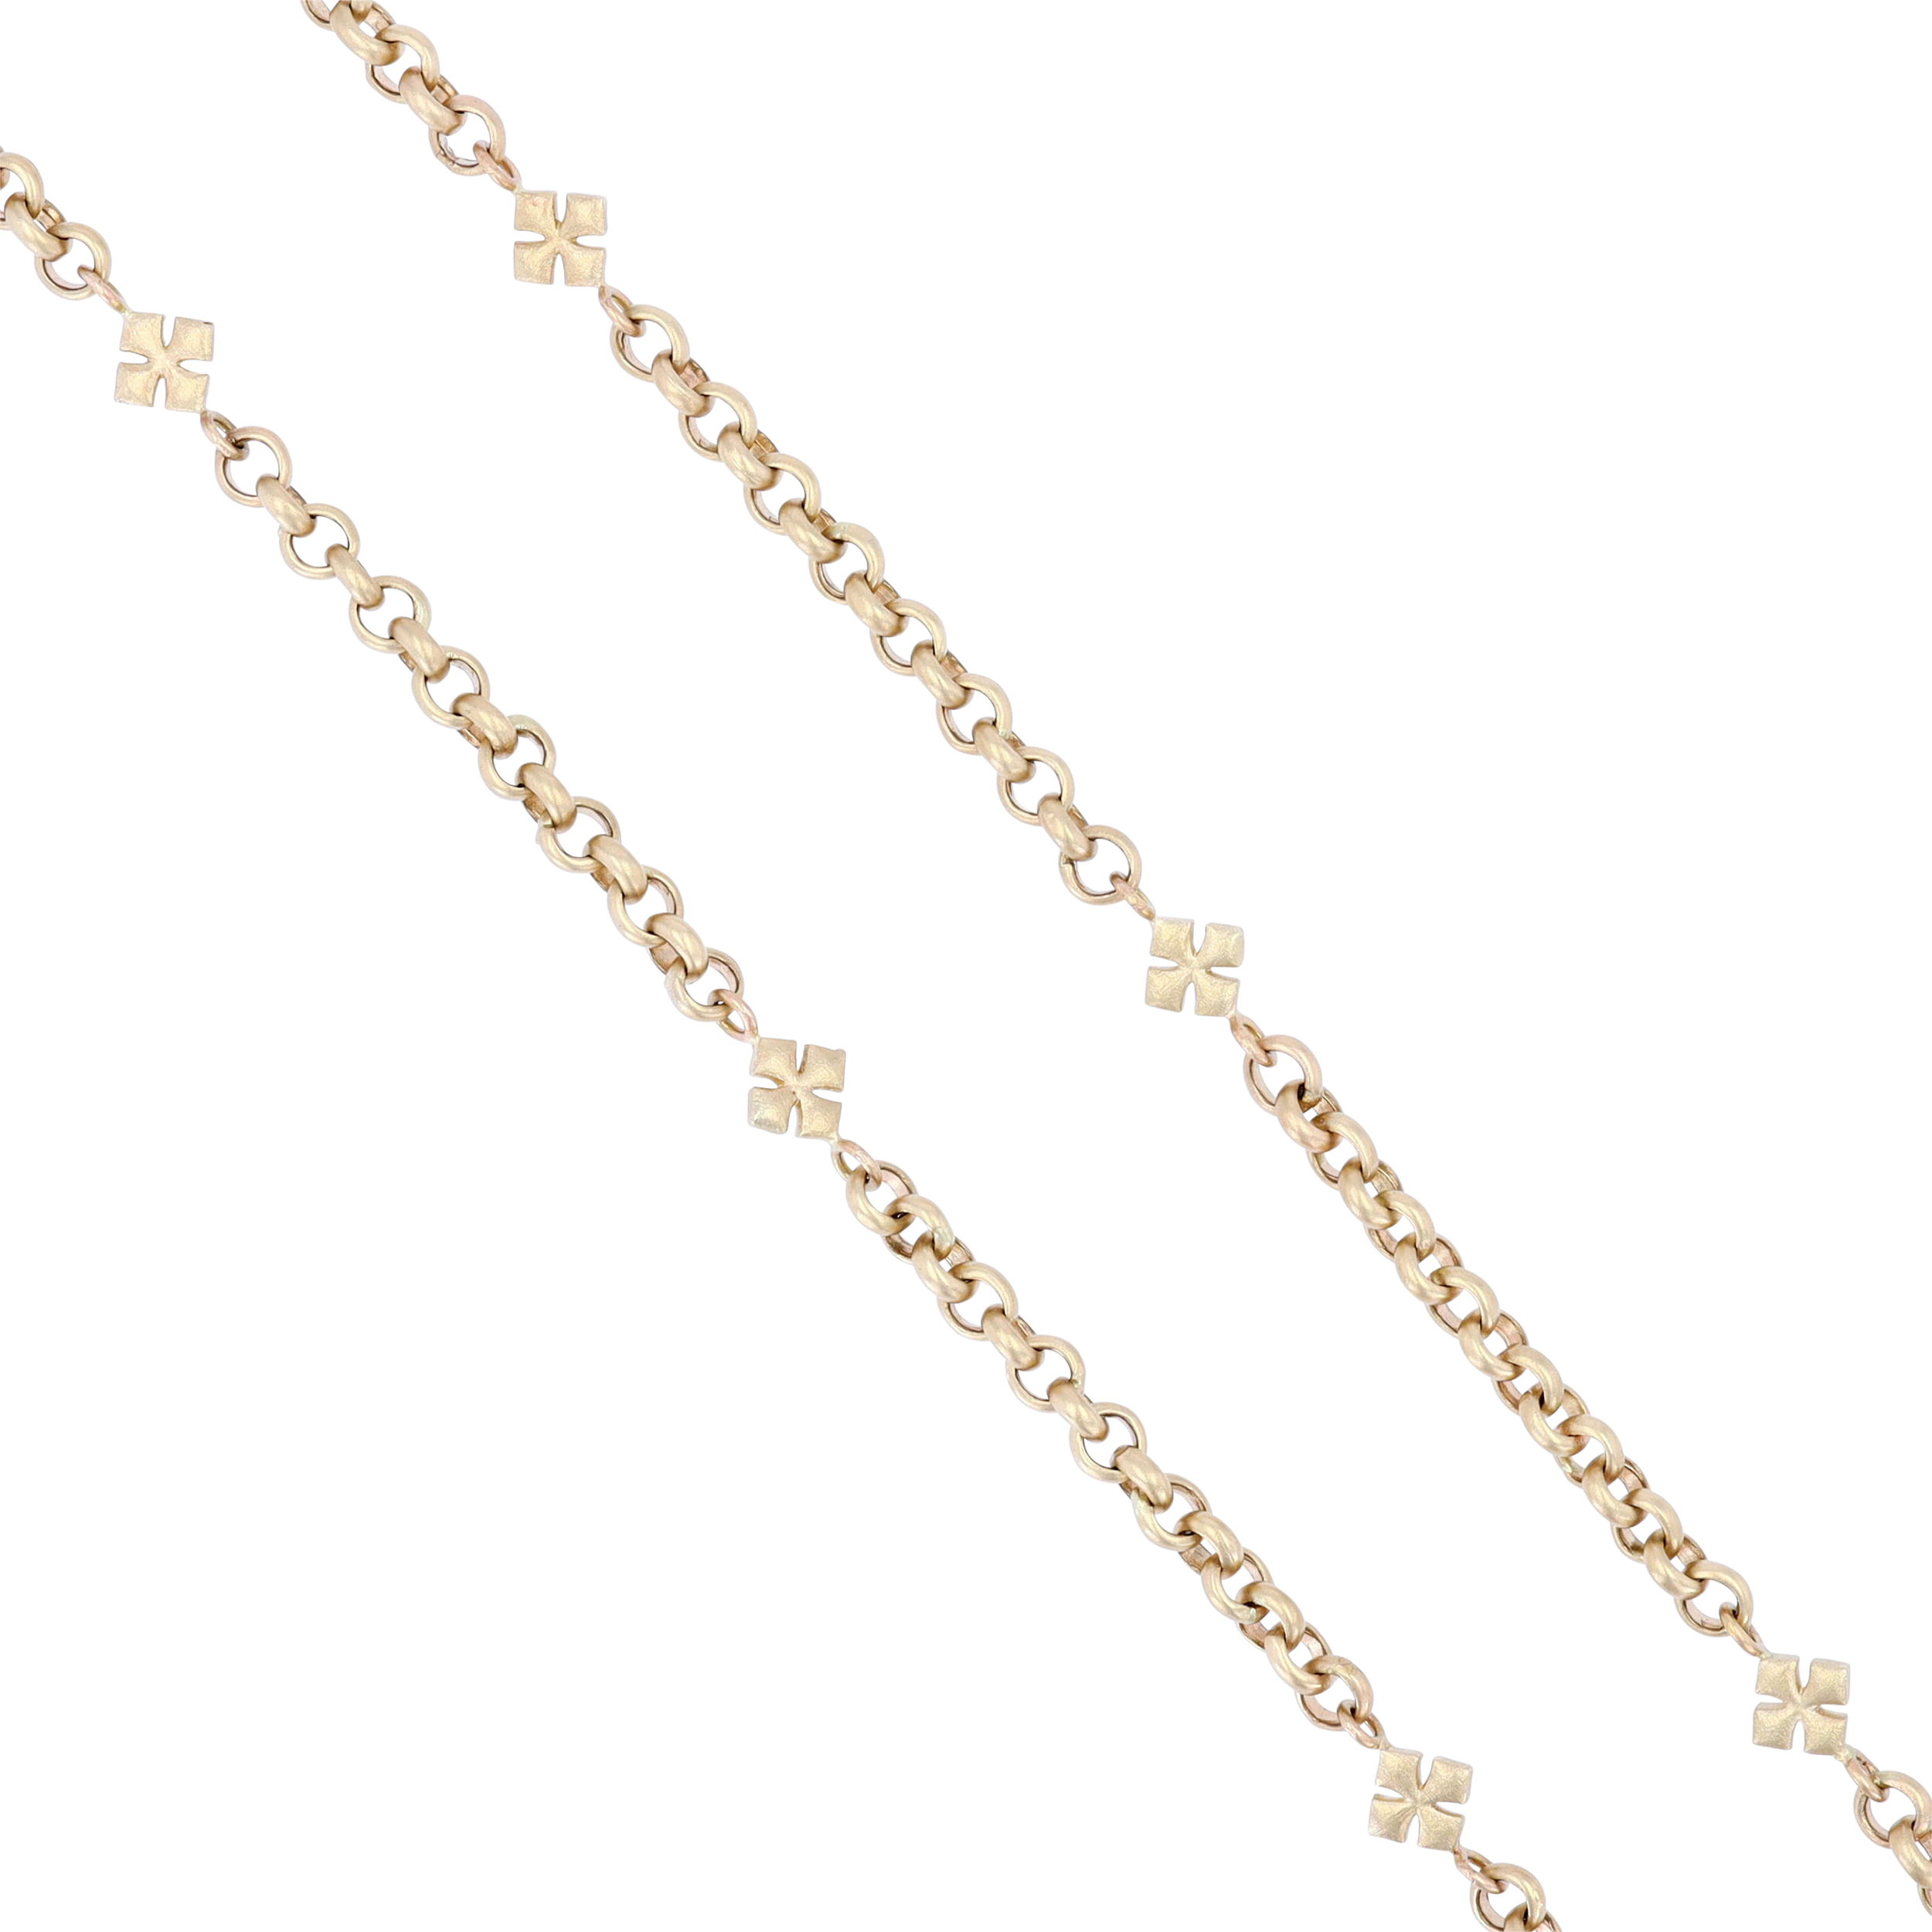 16" Solid Gold Rollo Chain With Cross Stations